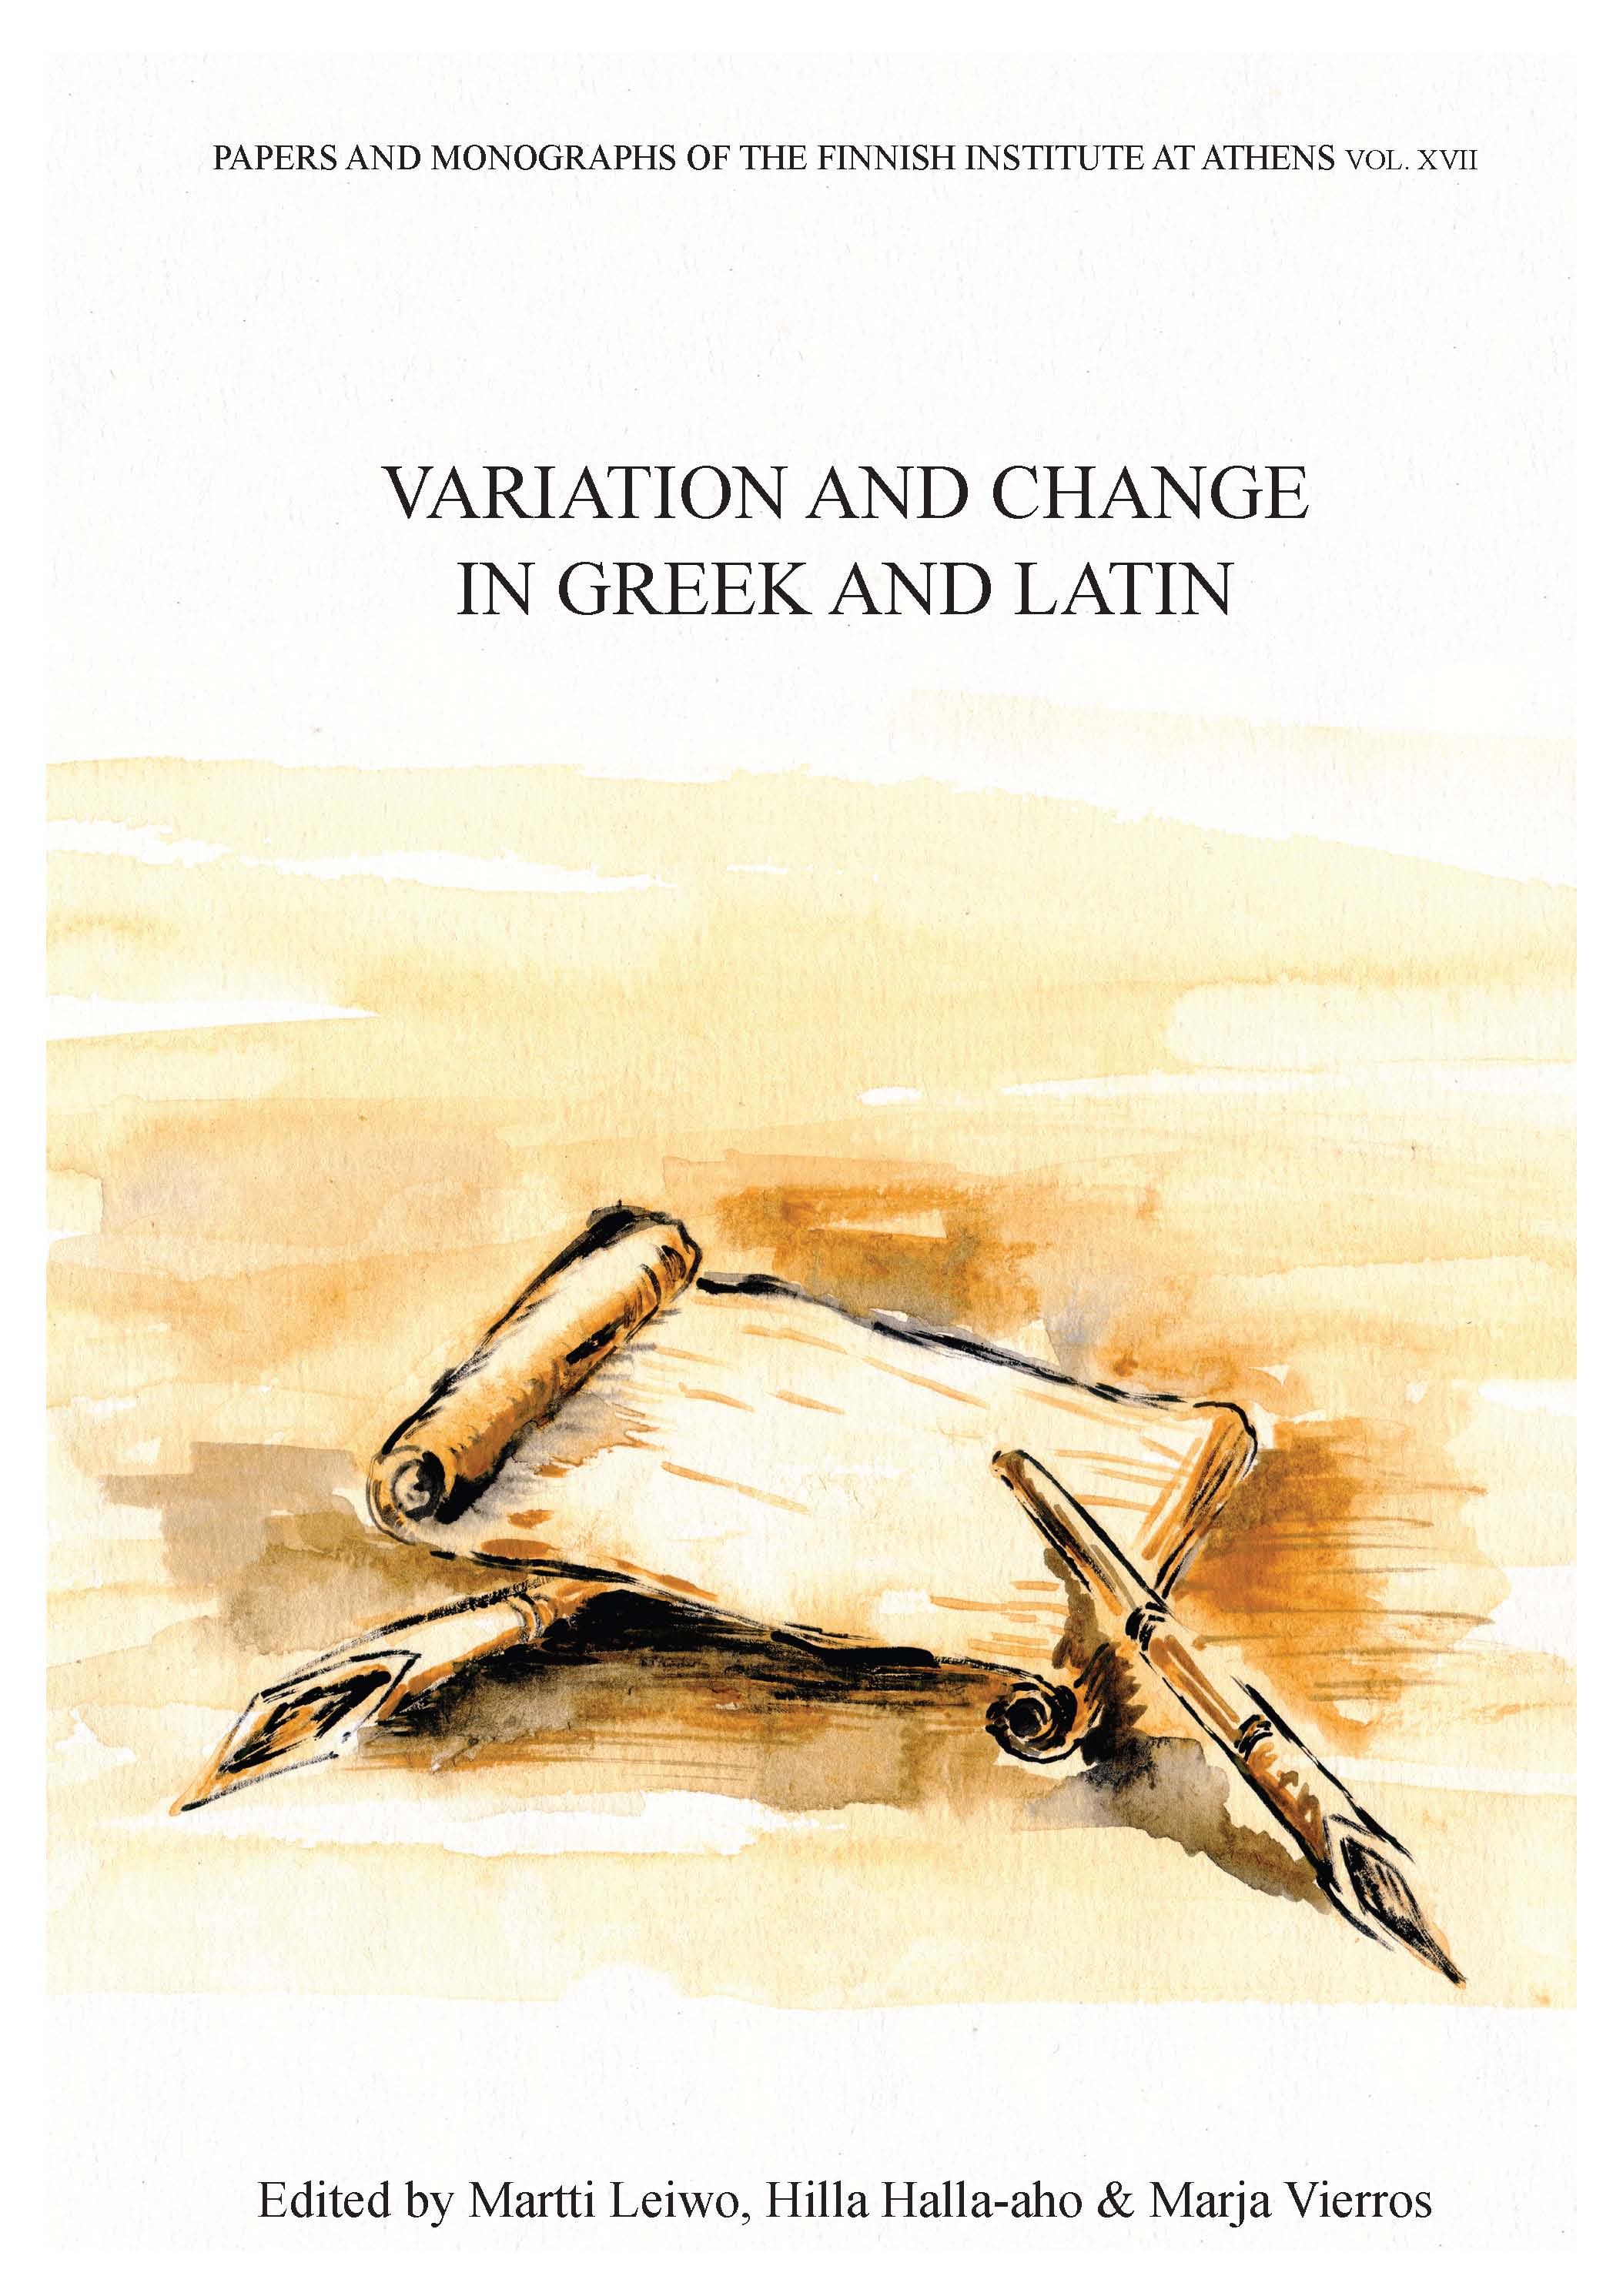 Two New Publications for ISAW Research Scholar Marja Vierros 